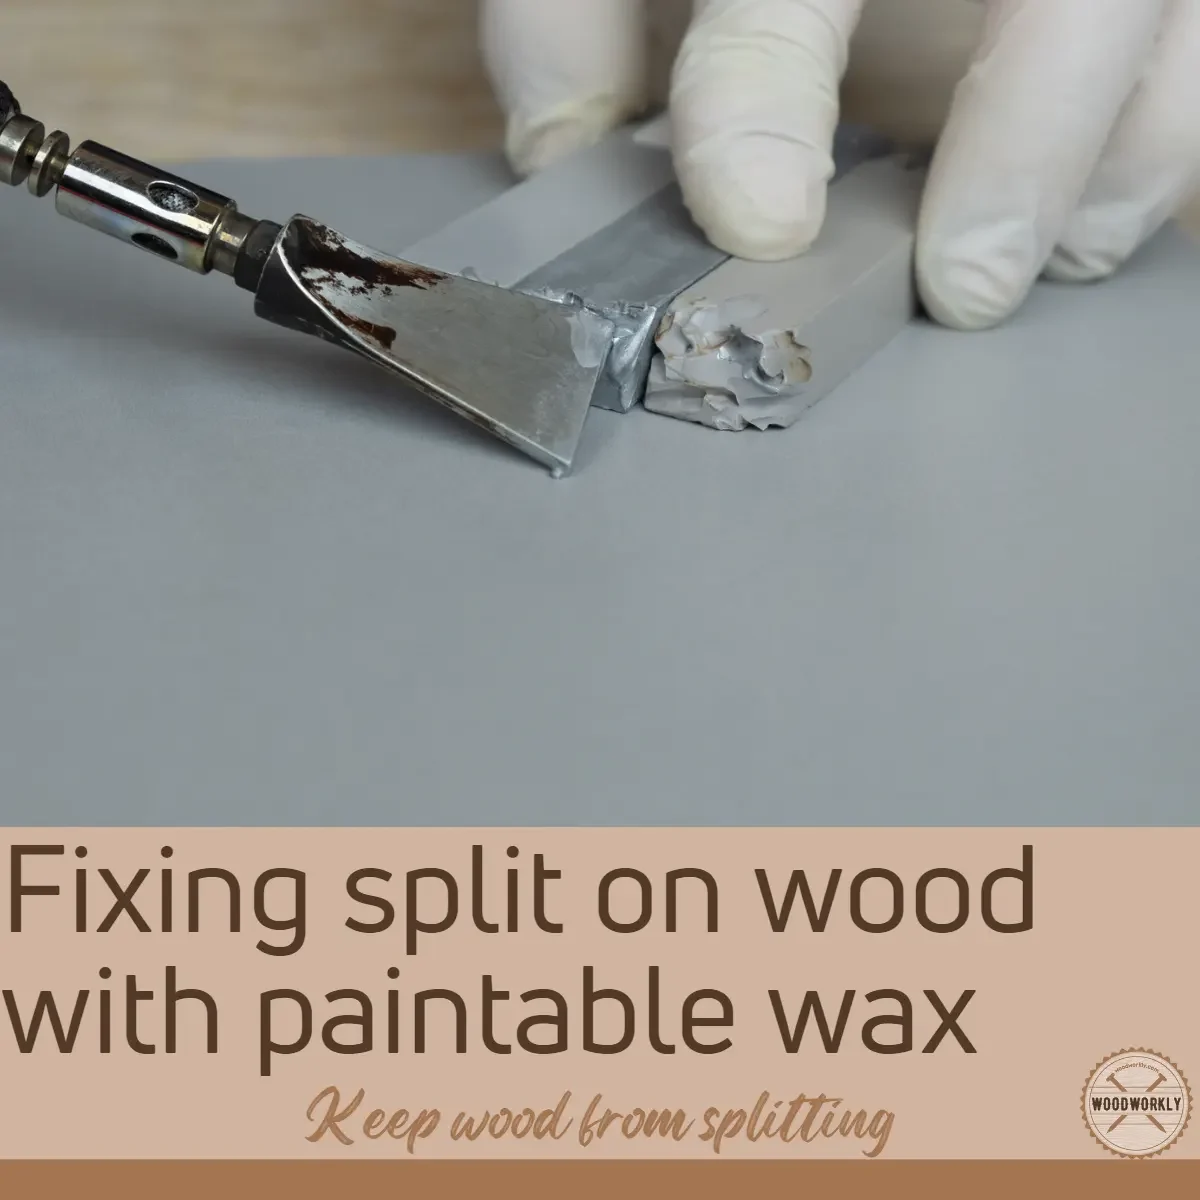 Fixing split on wood with paintable wax